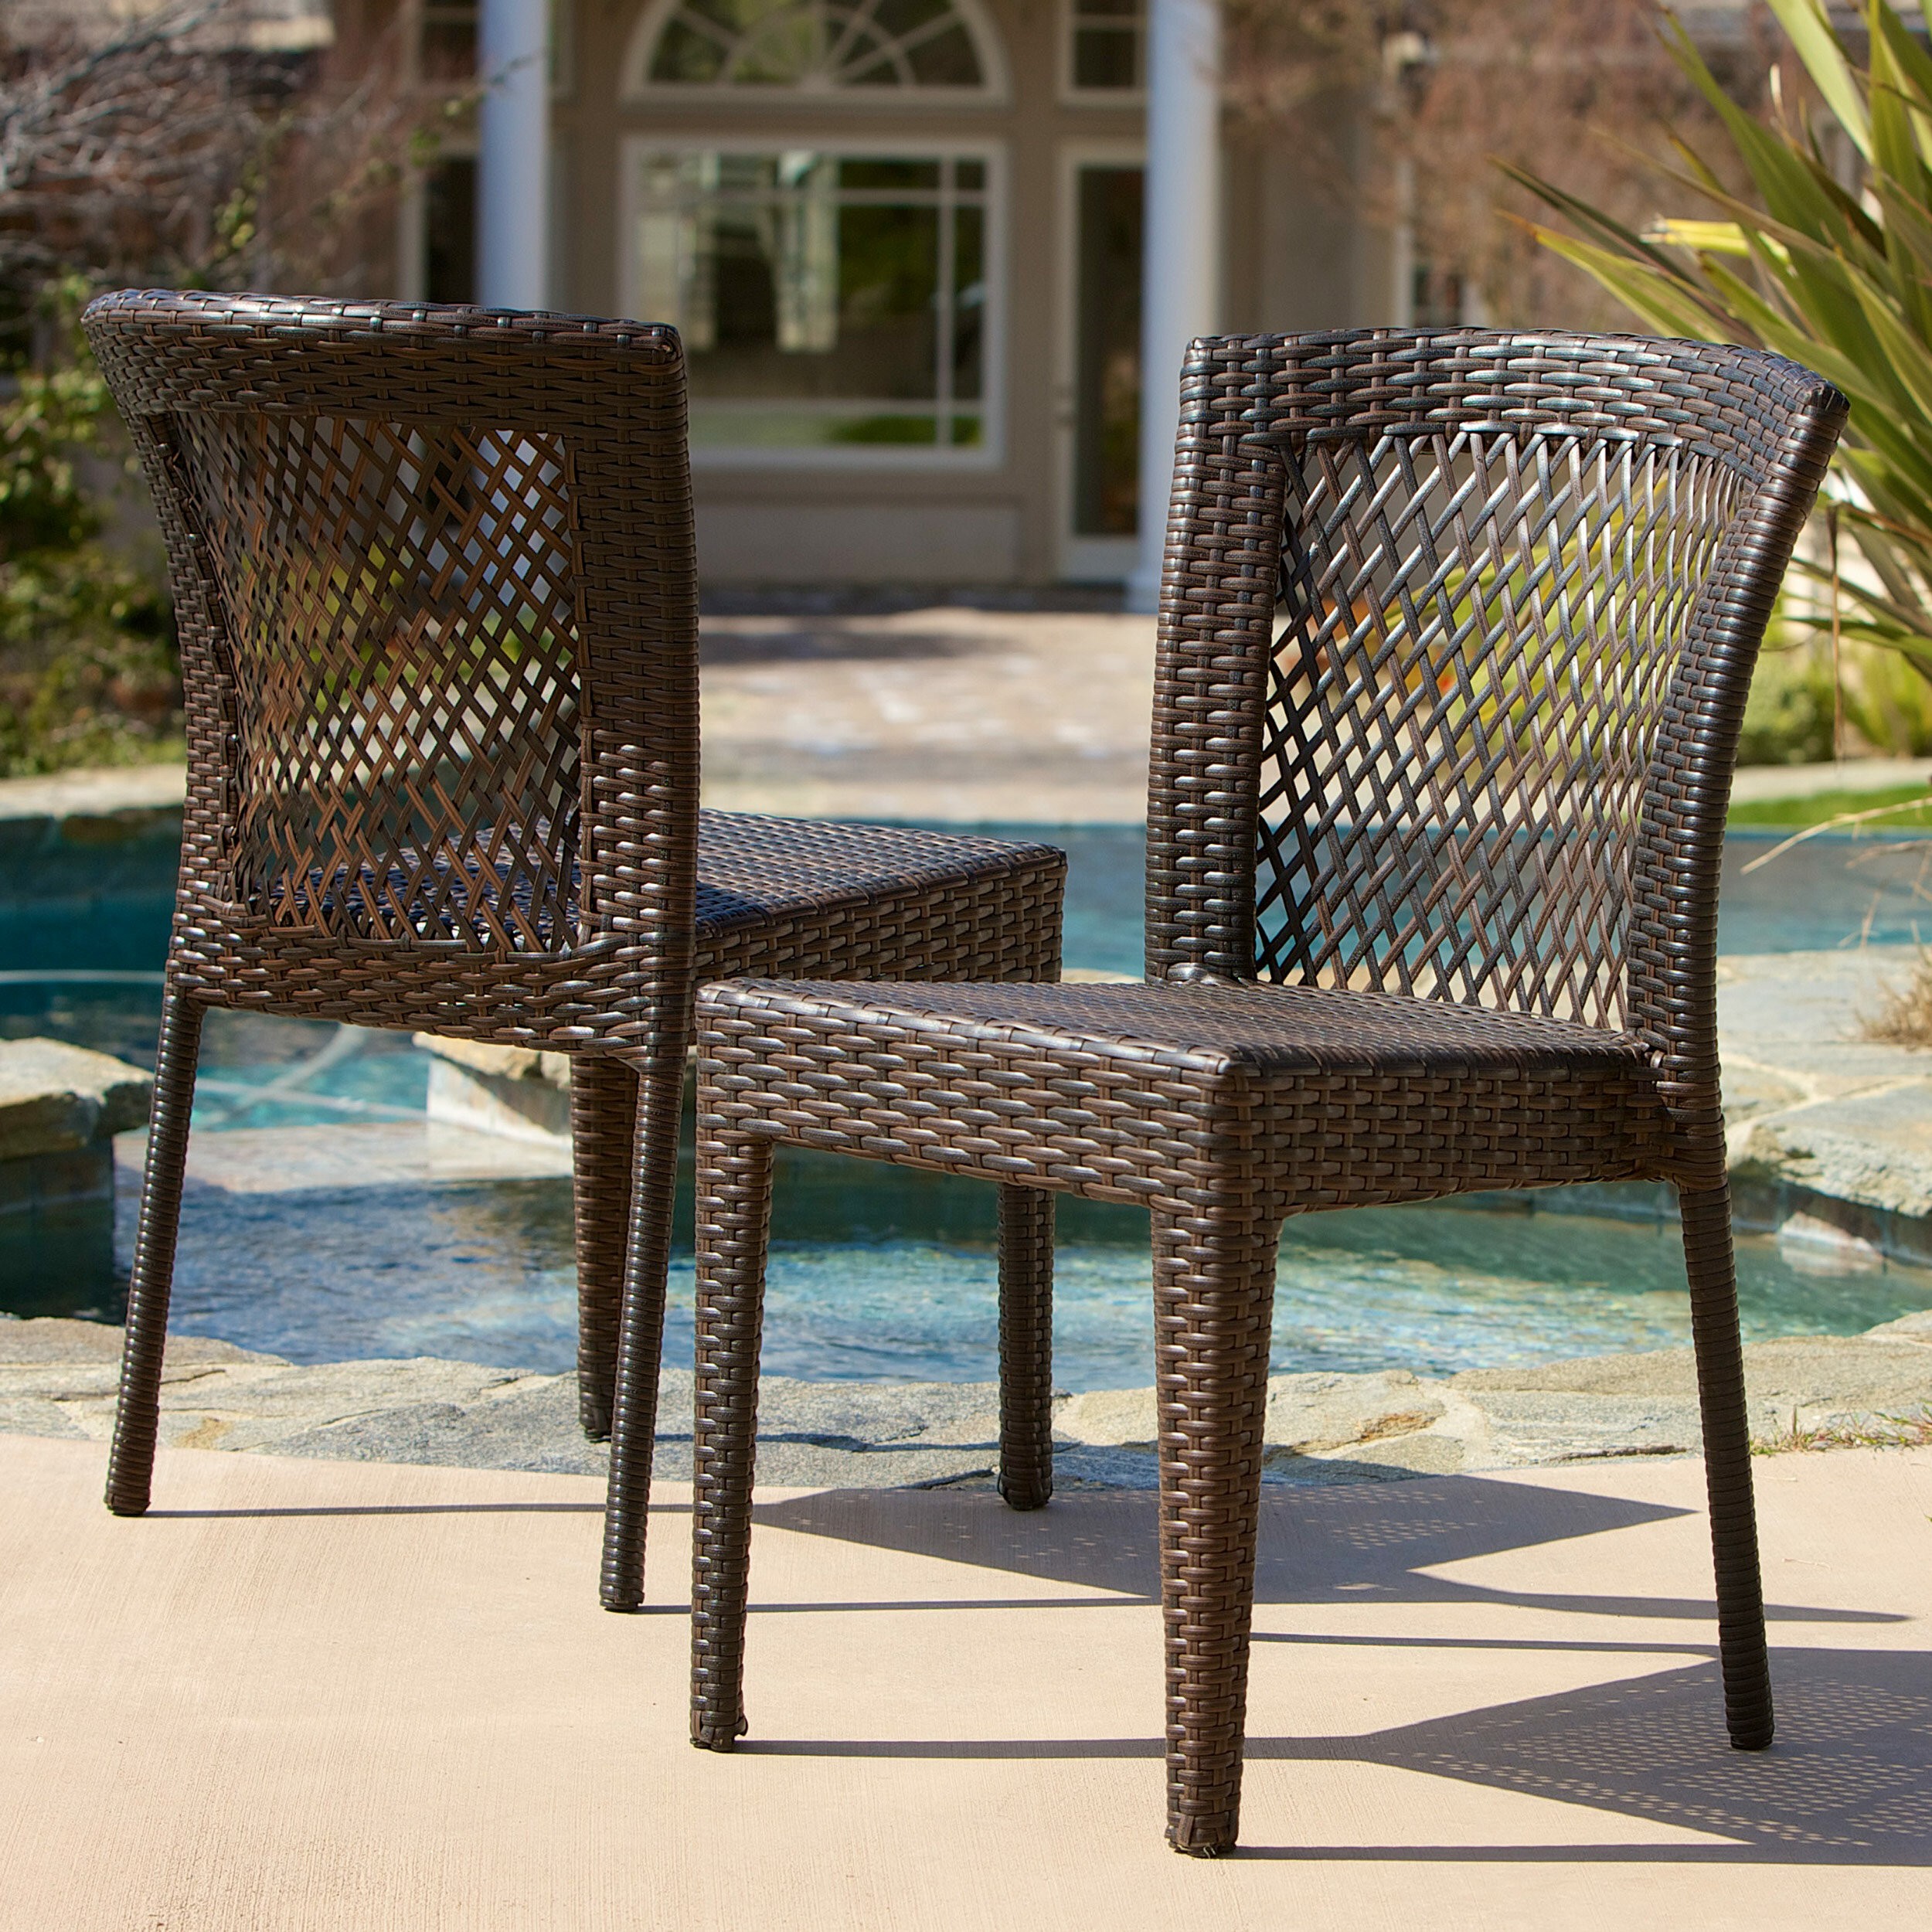 Best Selling Dawn Outdoor Wicker Chairs, Set of 2